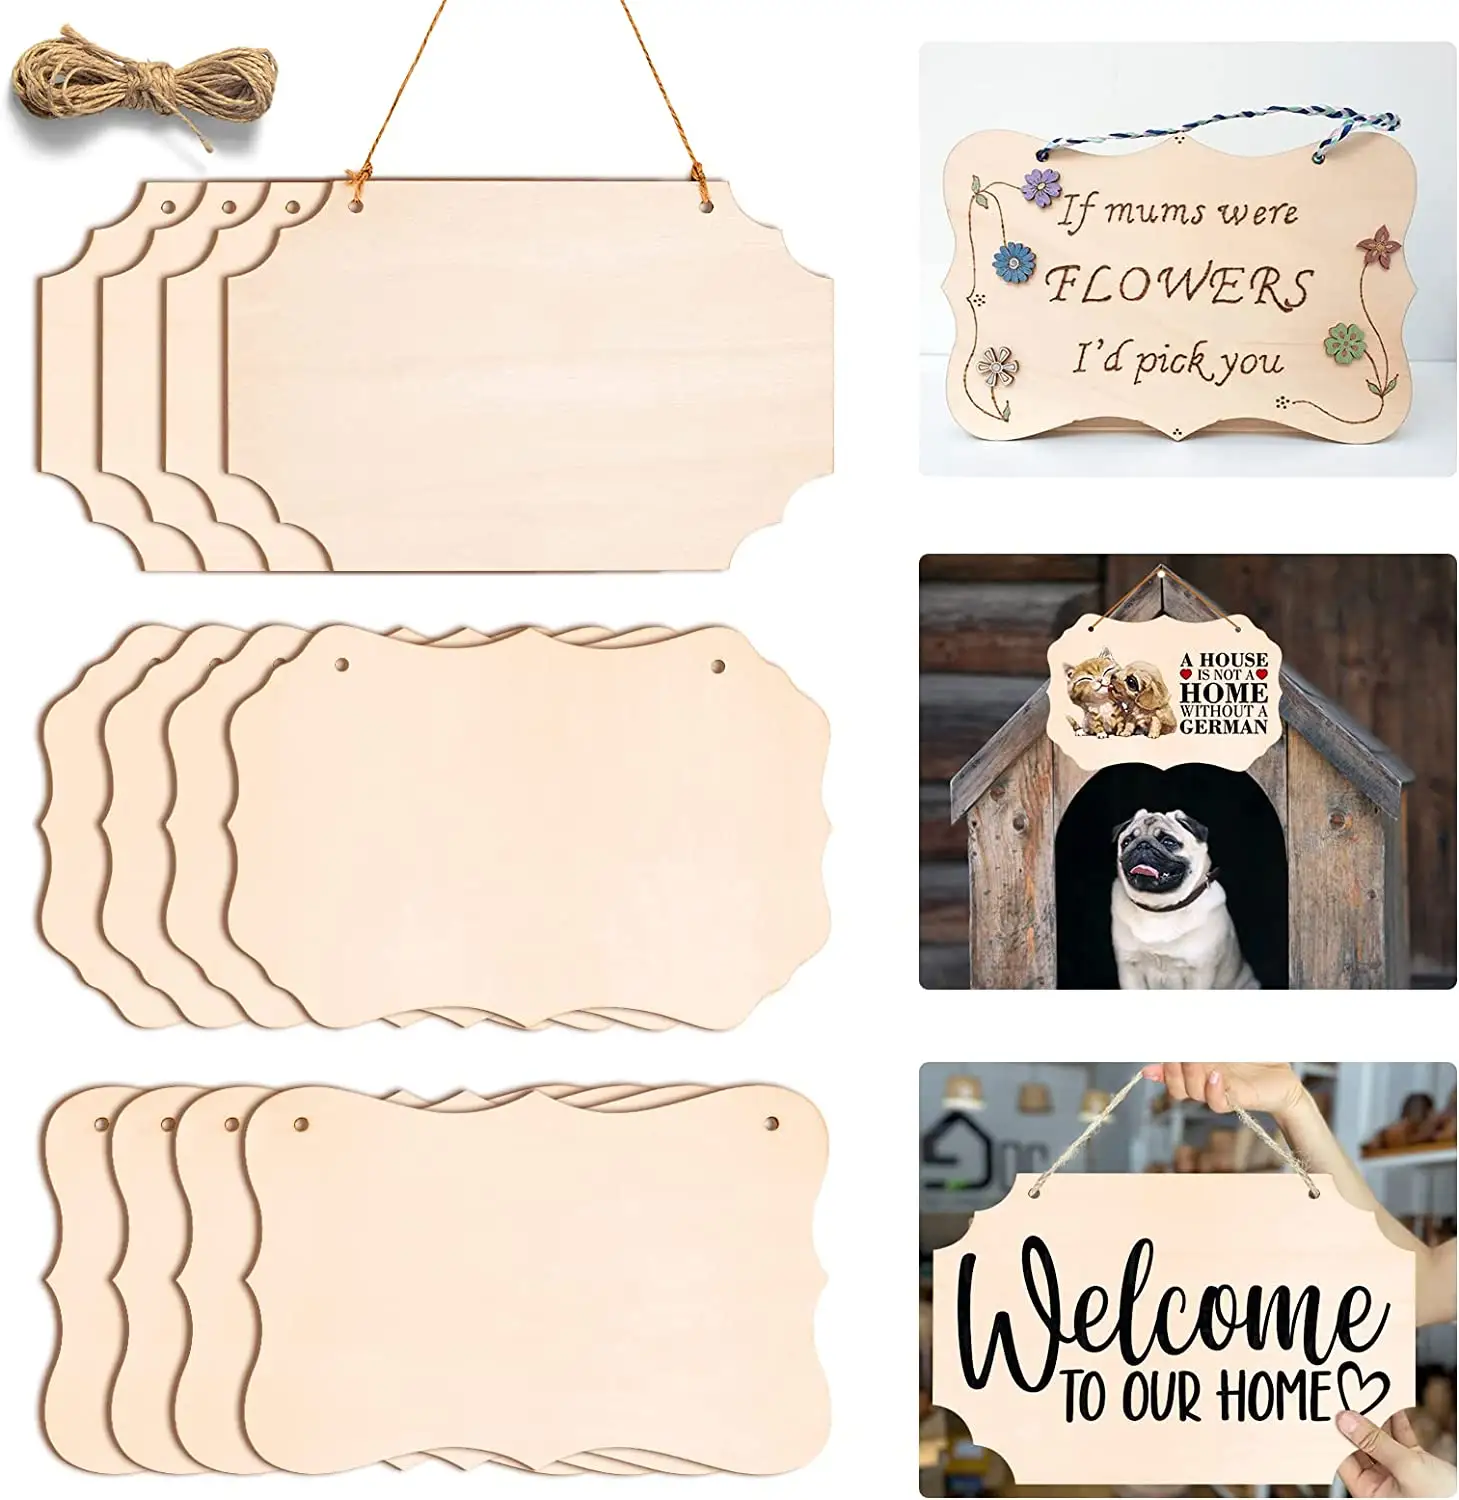 Wooden rustic door signs with string are used for painting, DIY craft and home decoration wood sign blank Wooden door plate